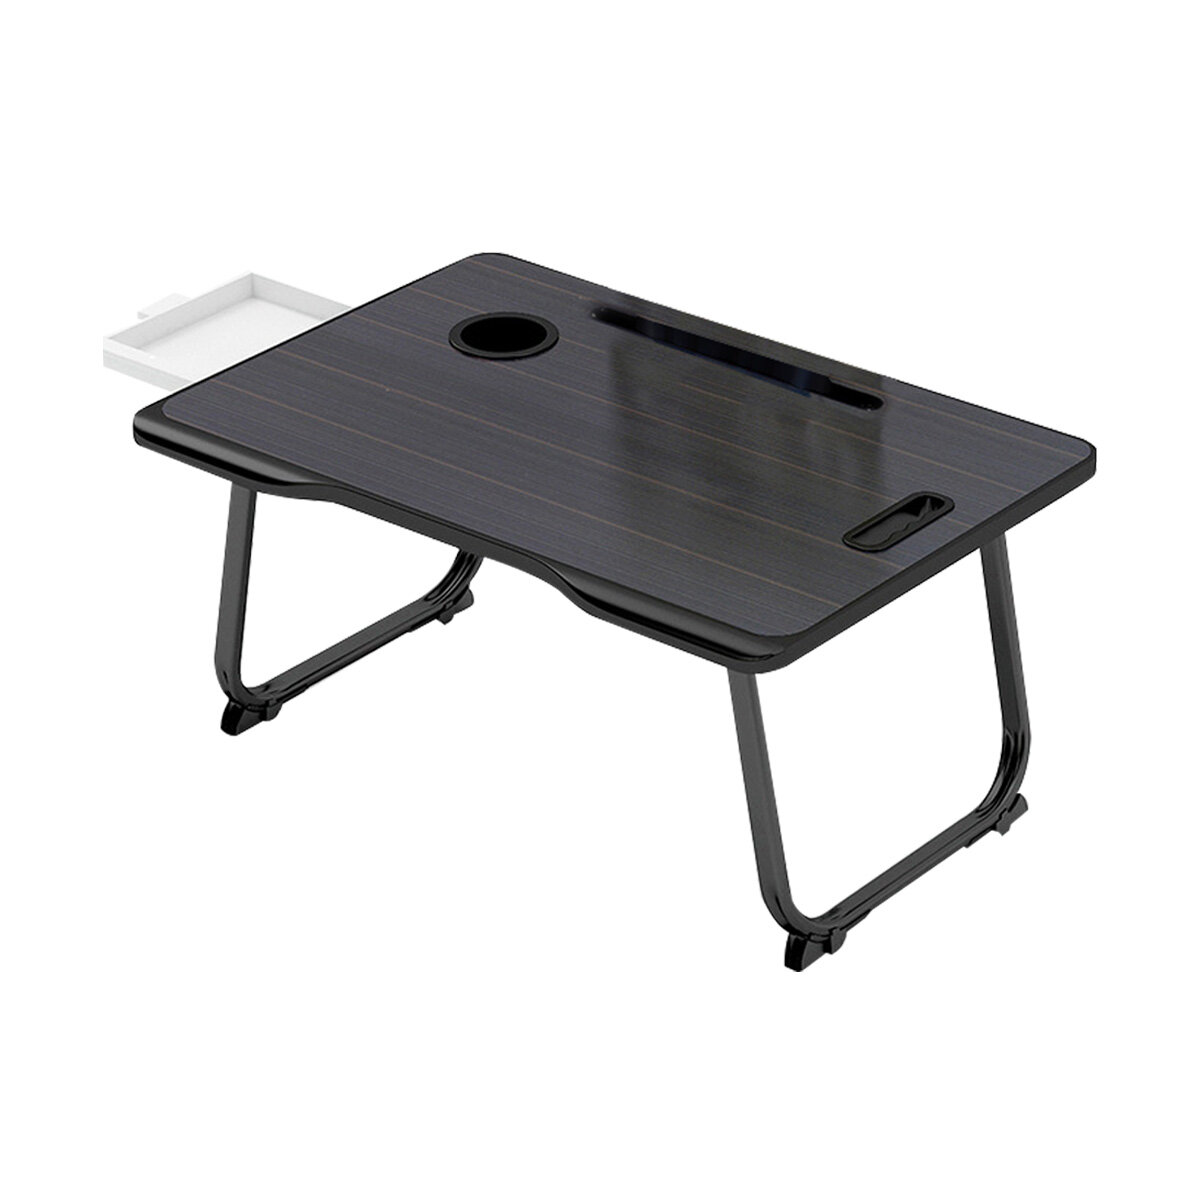 Folding Laptop Table Desk Notebook Learning Writing Desk with Small Drawer Cup Slot Lap Desk Bed for Children Student Ho